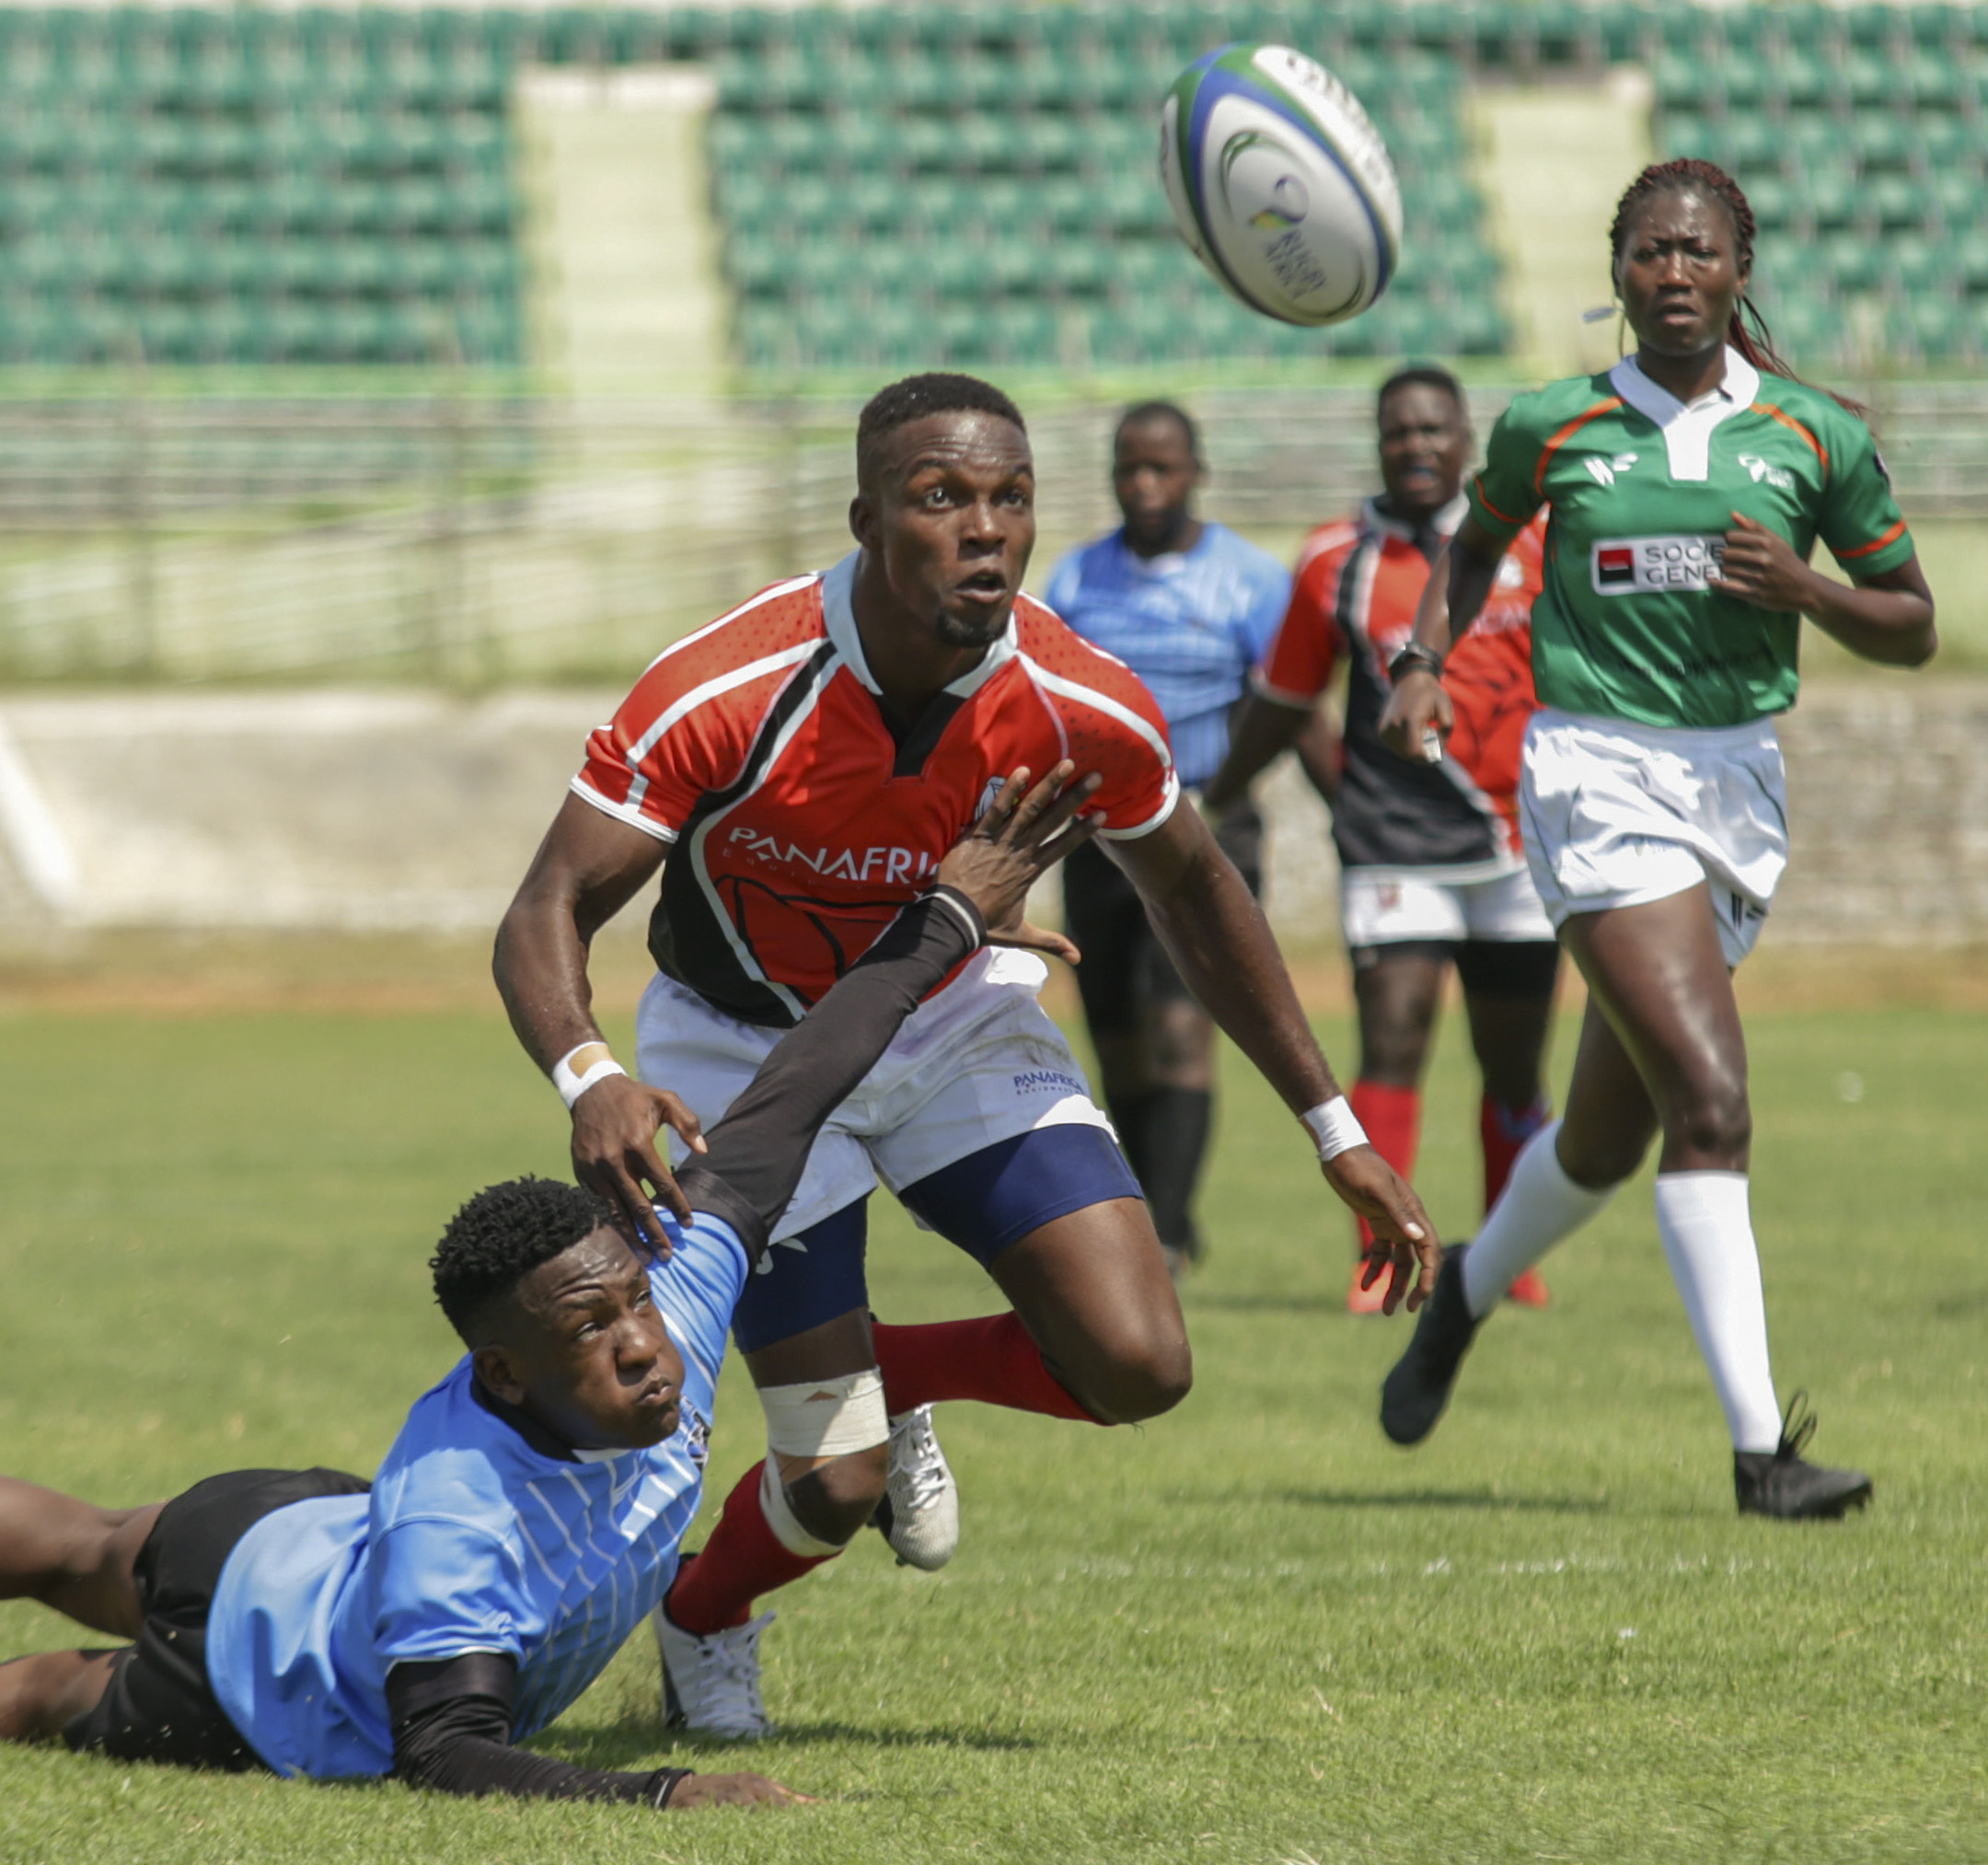 Ghana defeats Botswana 36-25 in Rugby Africa Cup 2020 kick-off match ...